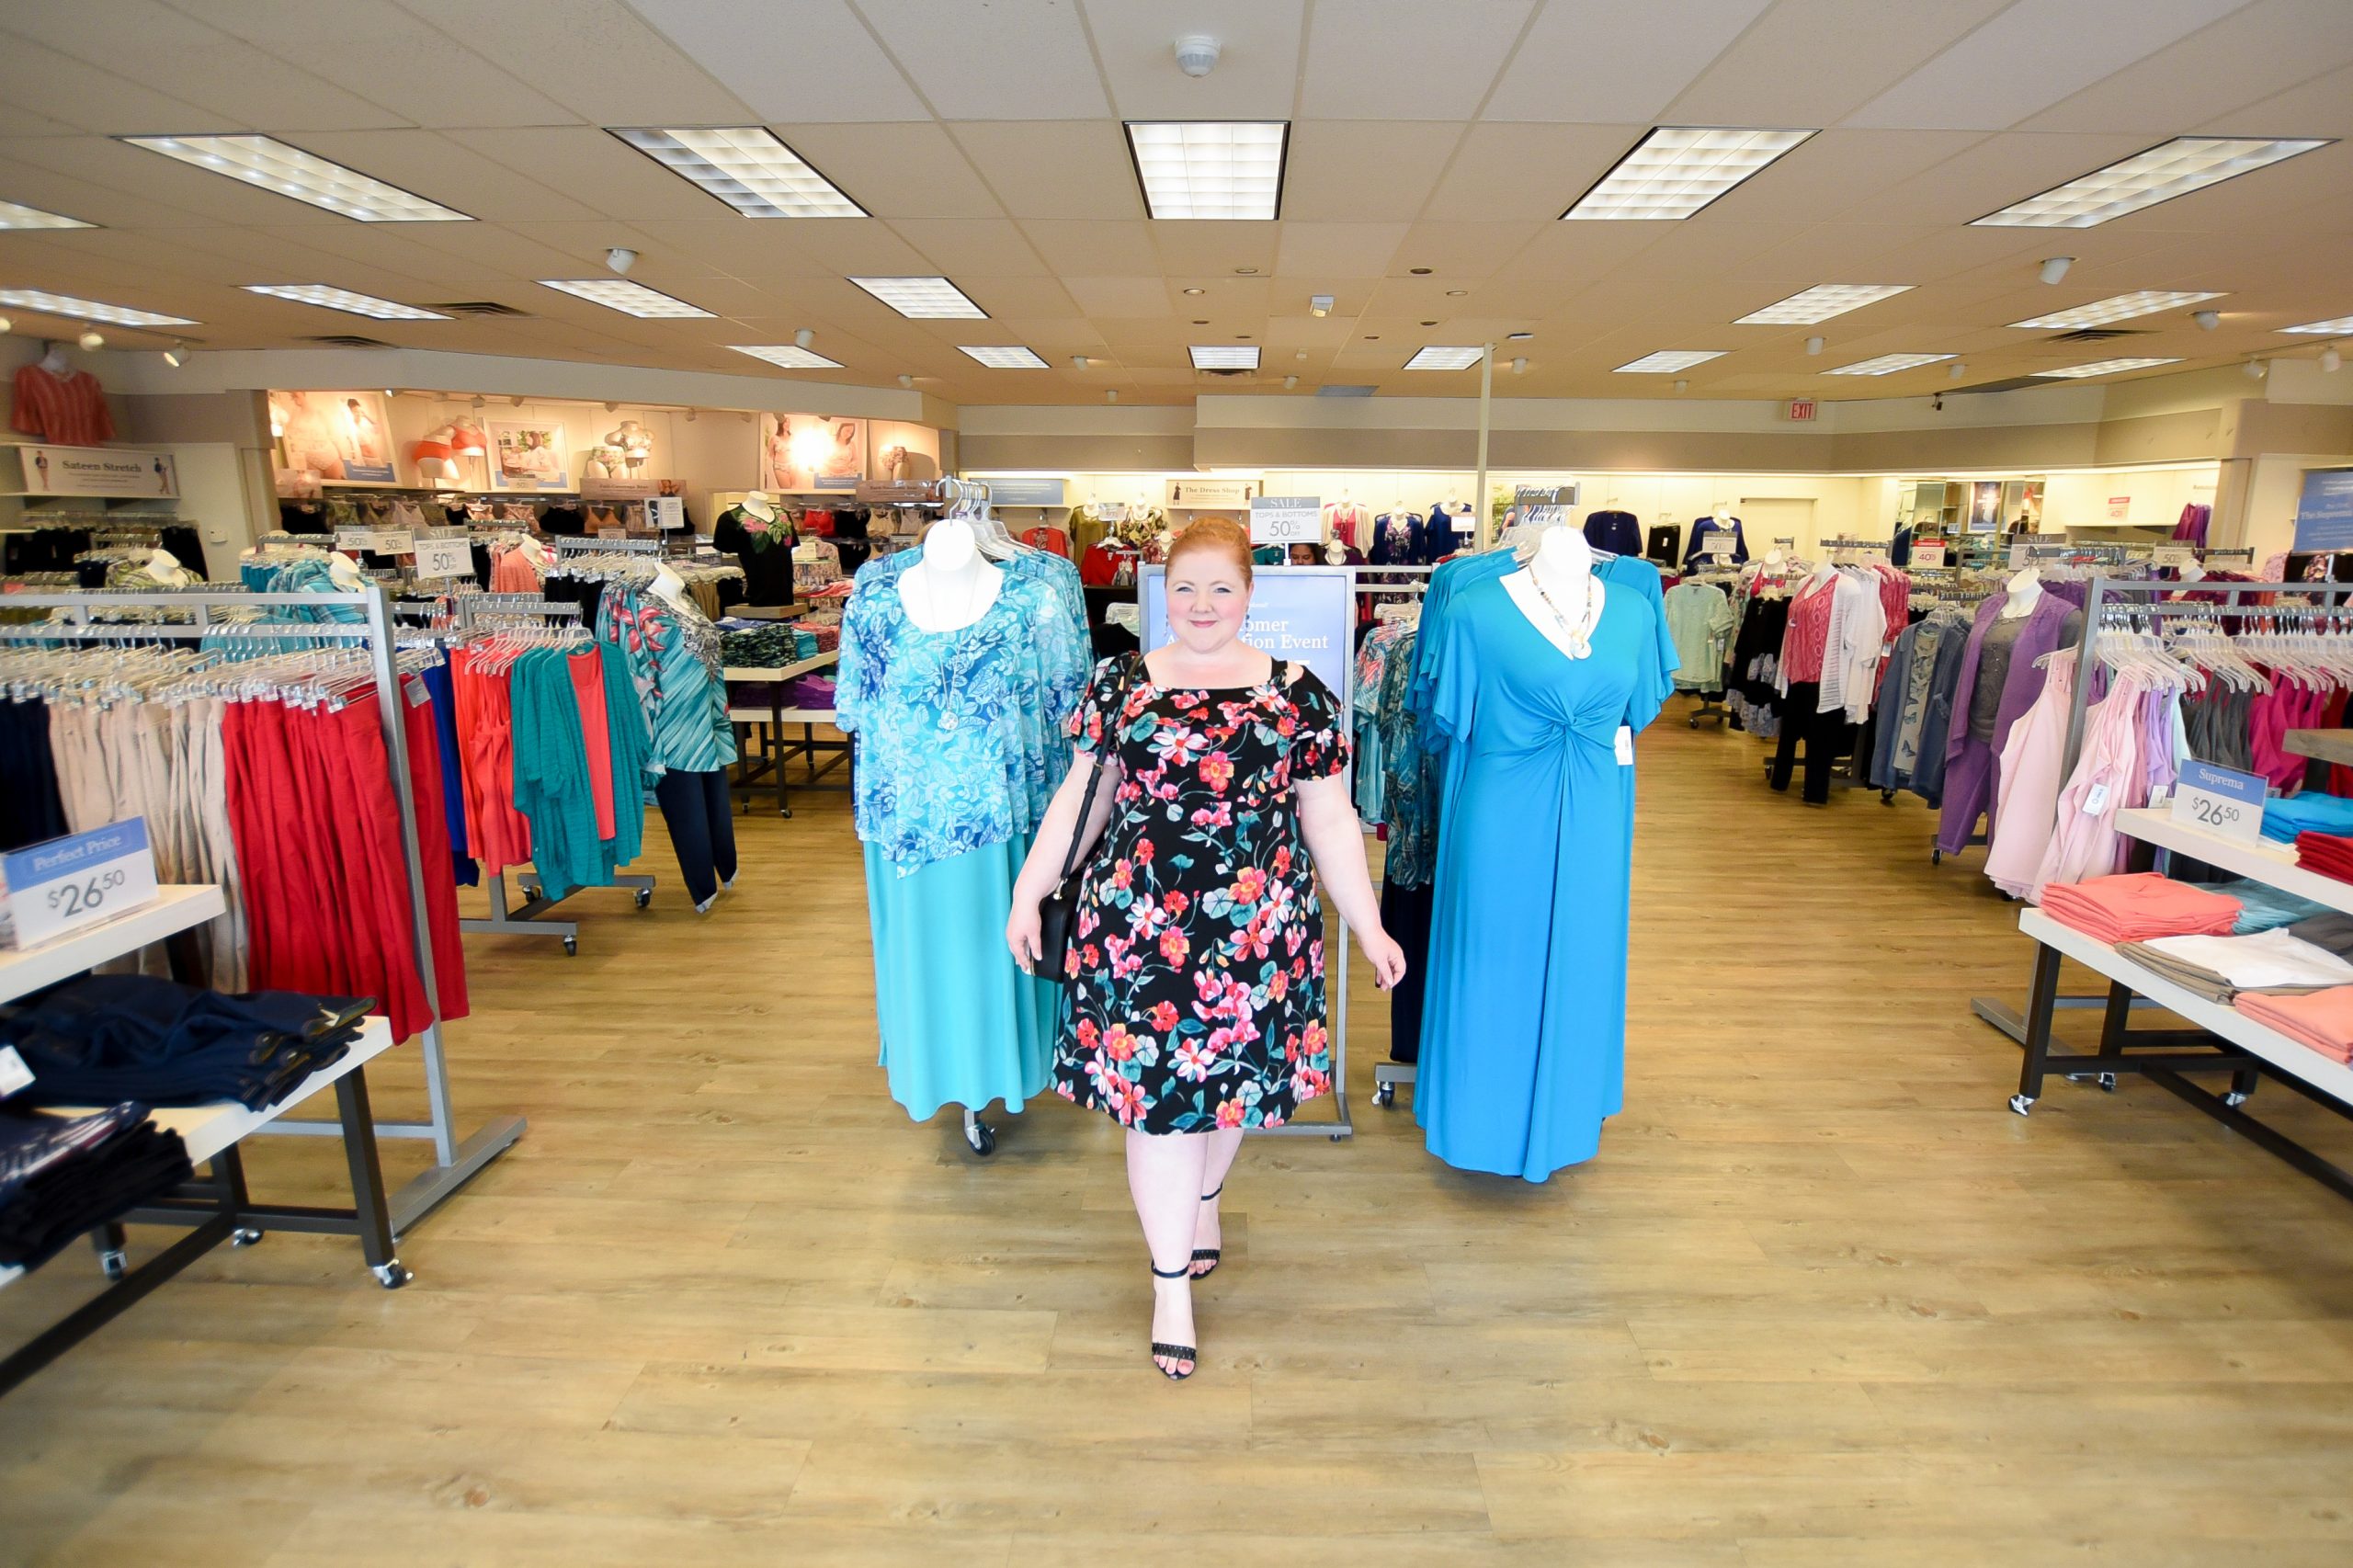 Catherines stores closings 2020: All stores to close in bankruptcy